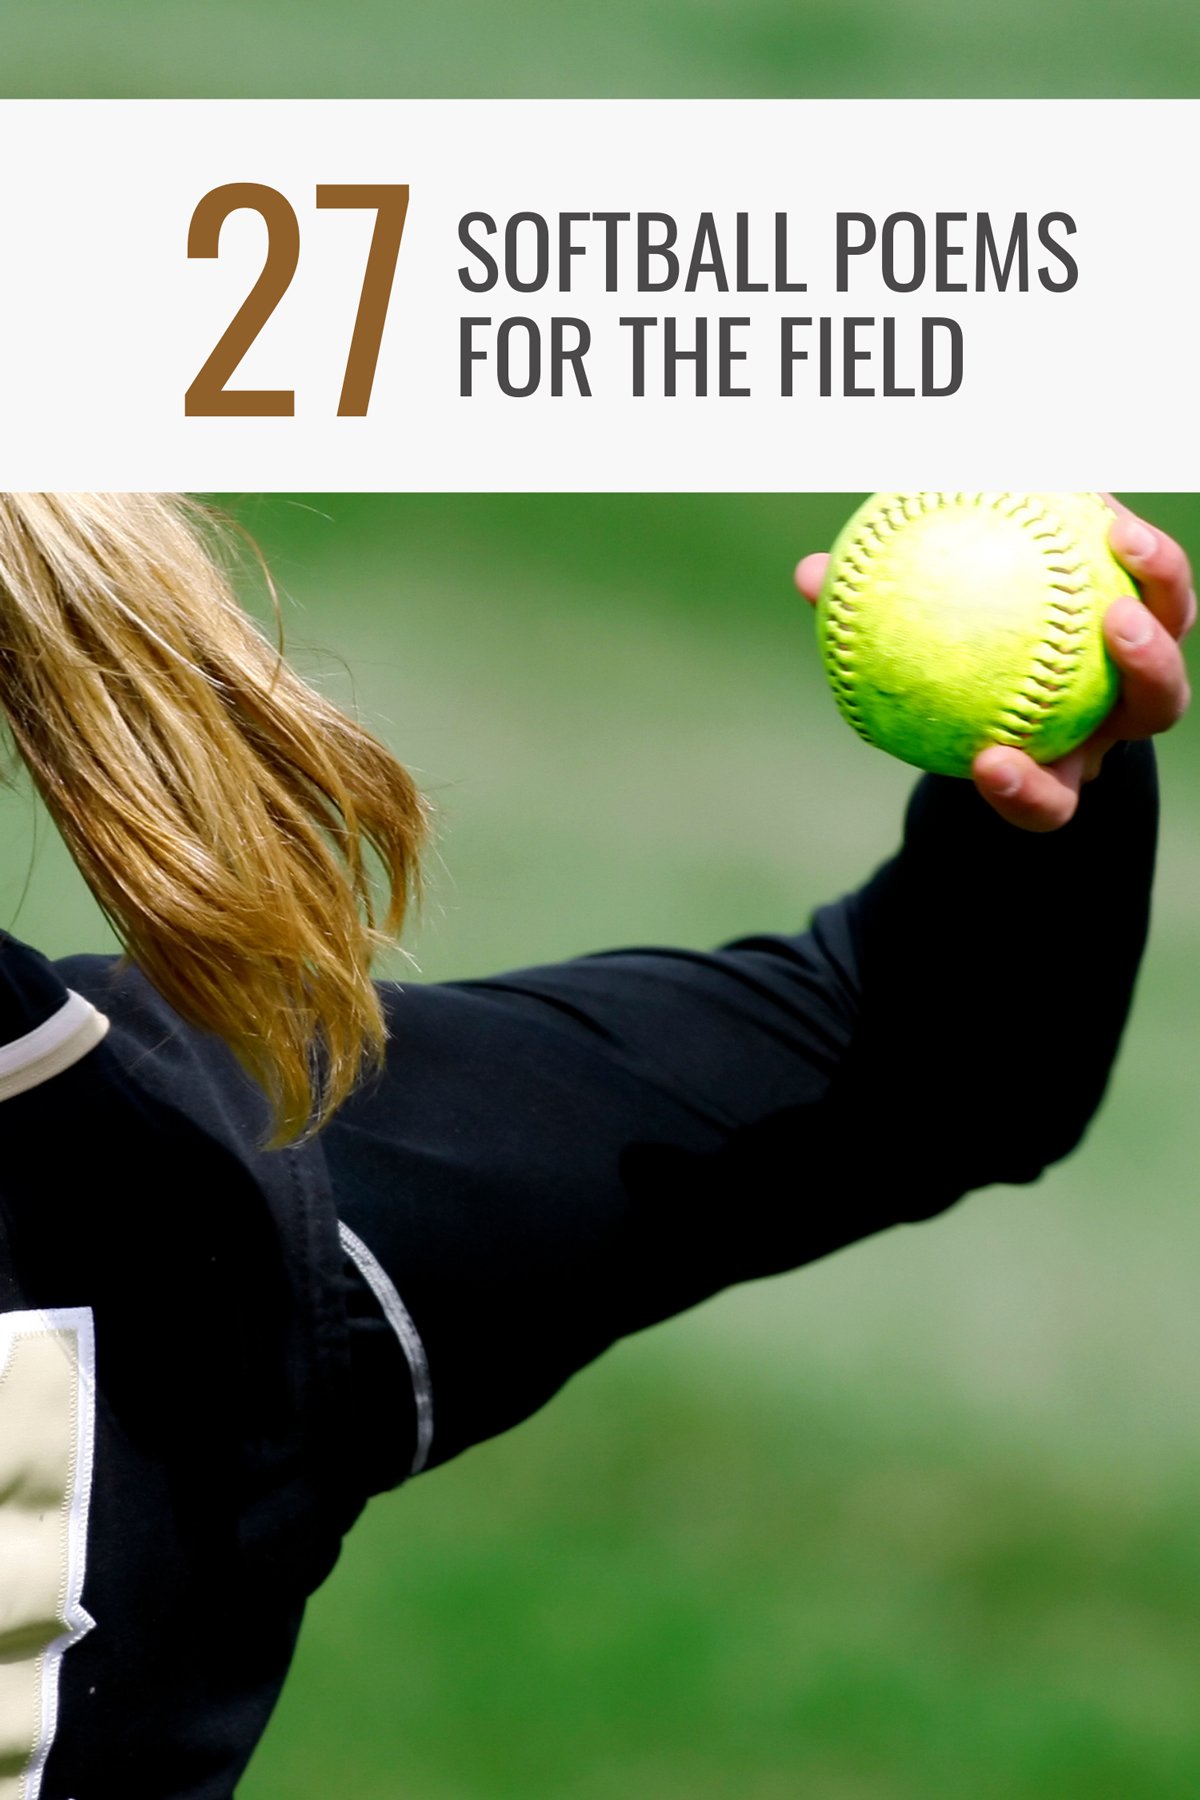 27 Softball Poems for The Field